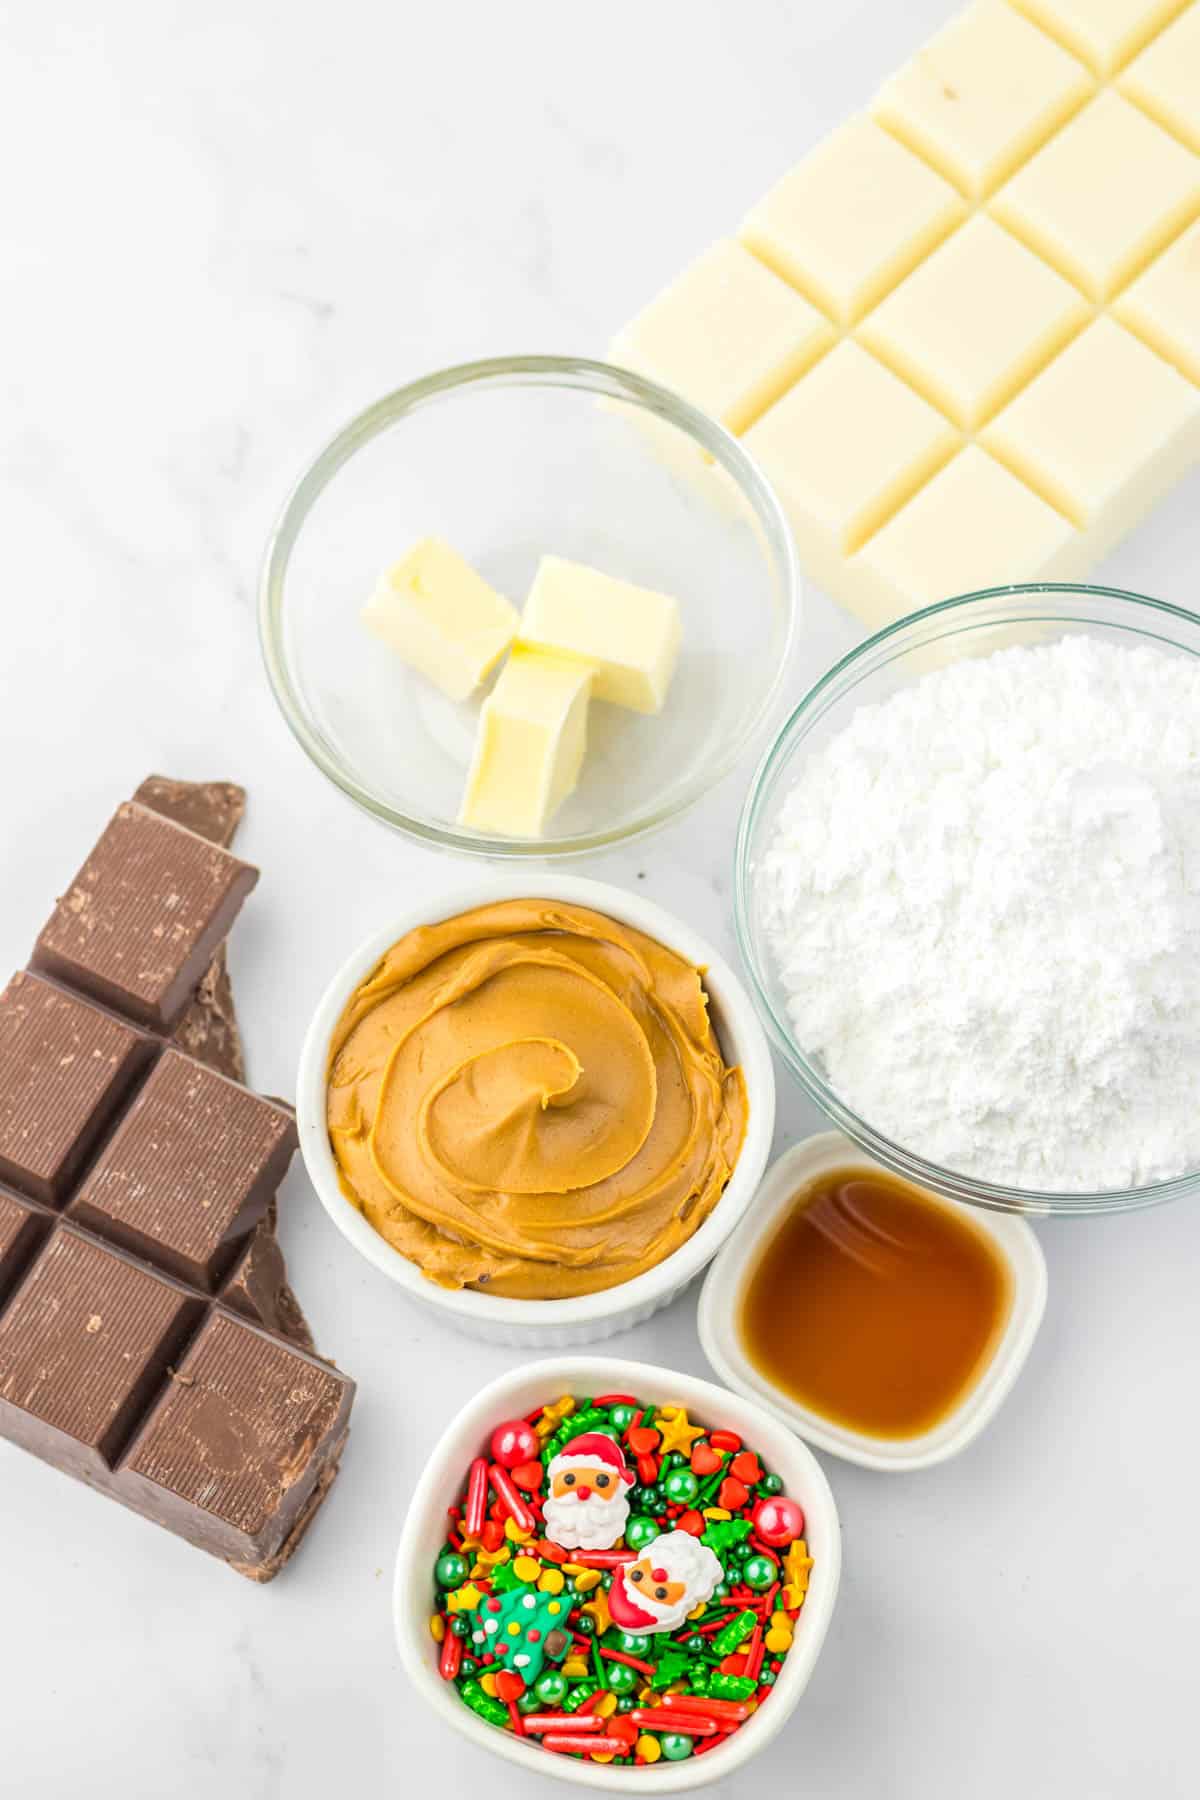 The ingredients for a christmas peanut butter cups recipe.